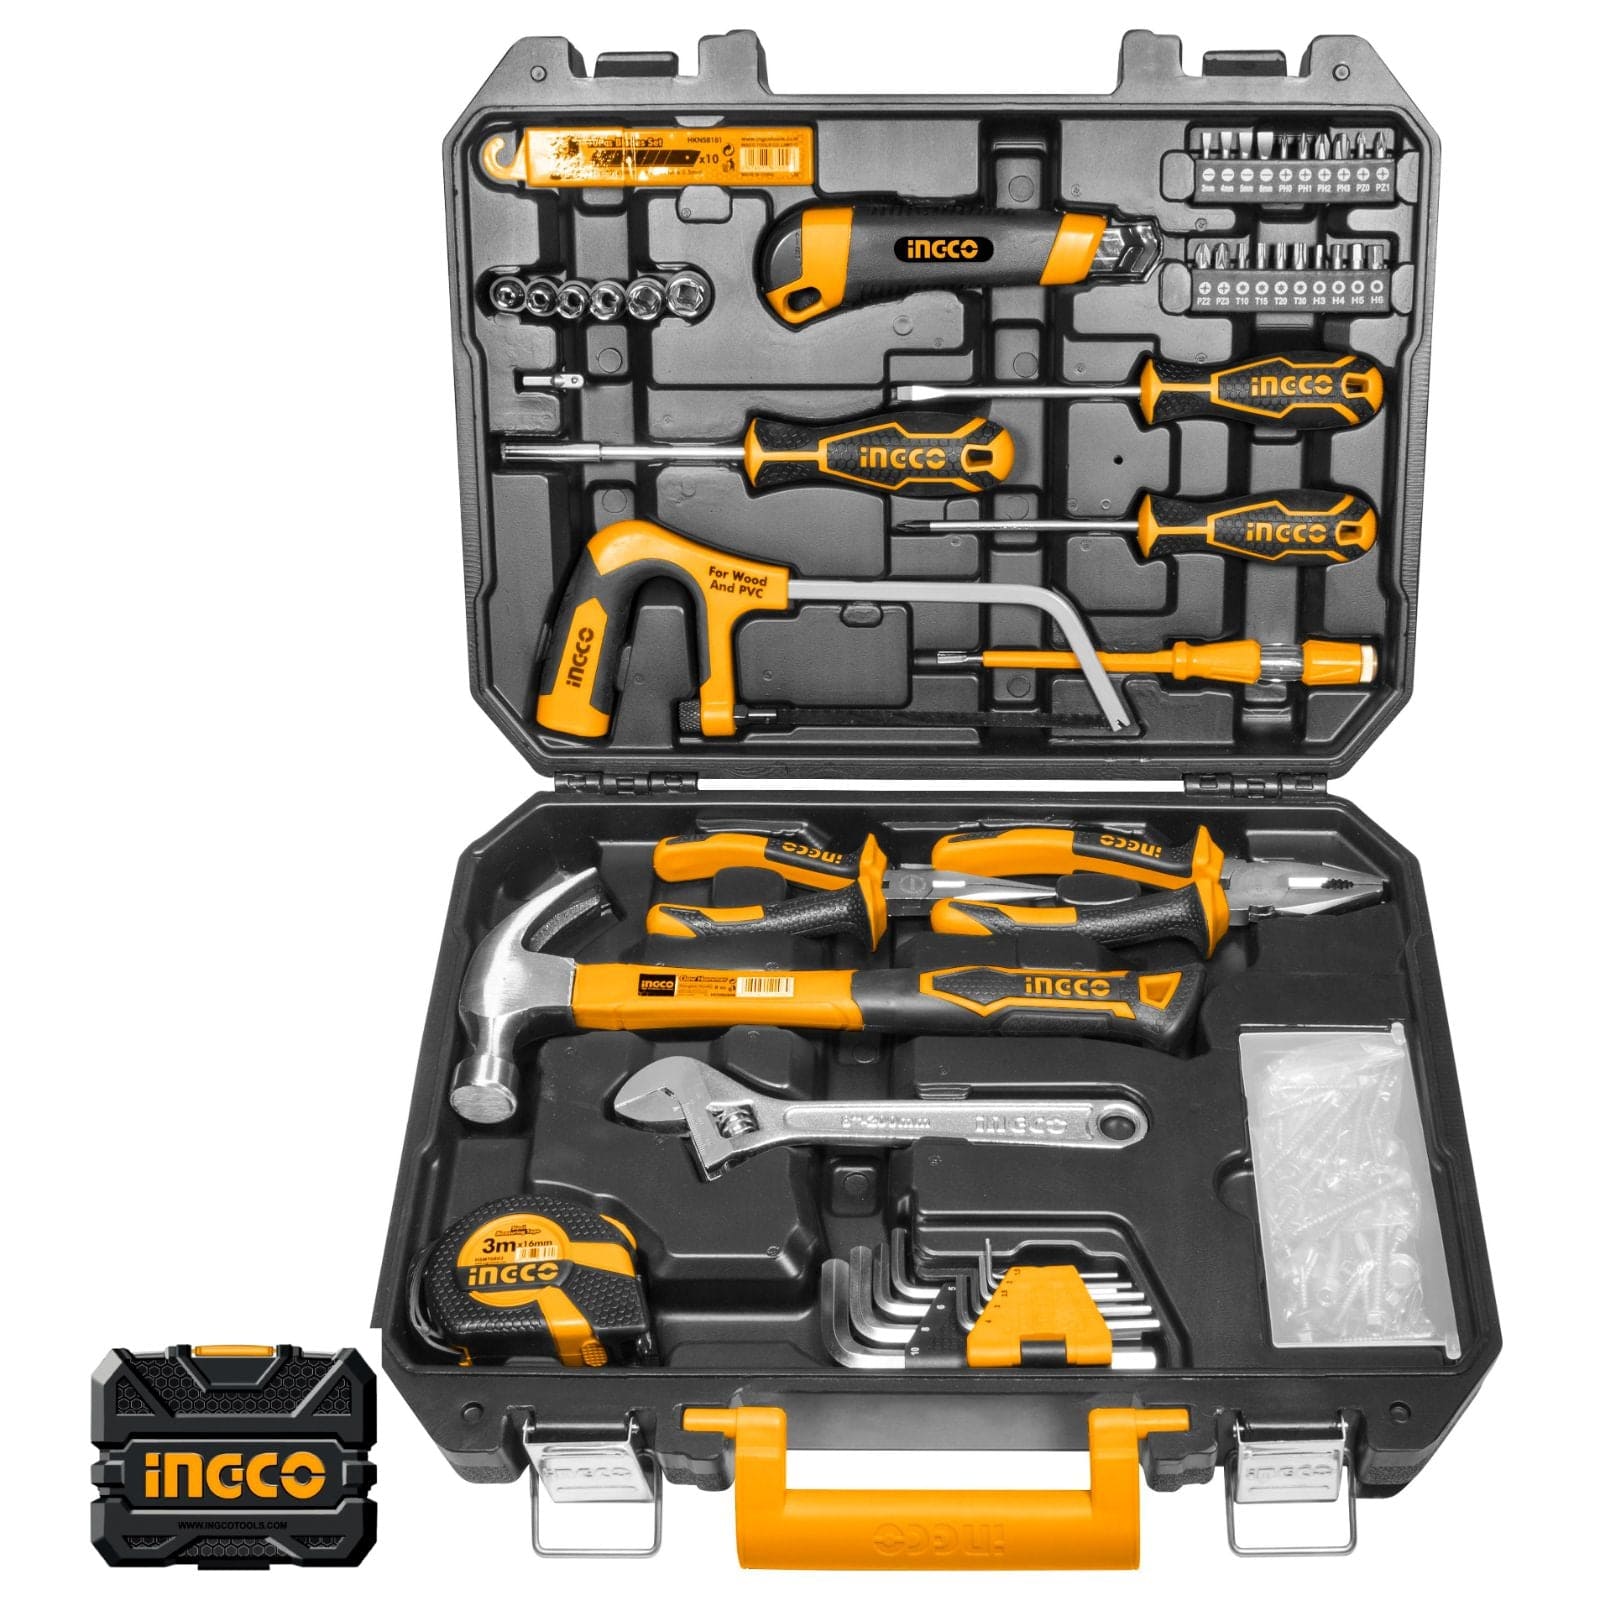 Ingco 117 Pieces Tools Set (HKTHP21171) - Complete Toolkit for Professionals and DIYers | Supply Master Ghana Tool Set Buy Tools hardware Building materials